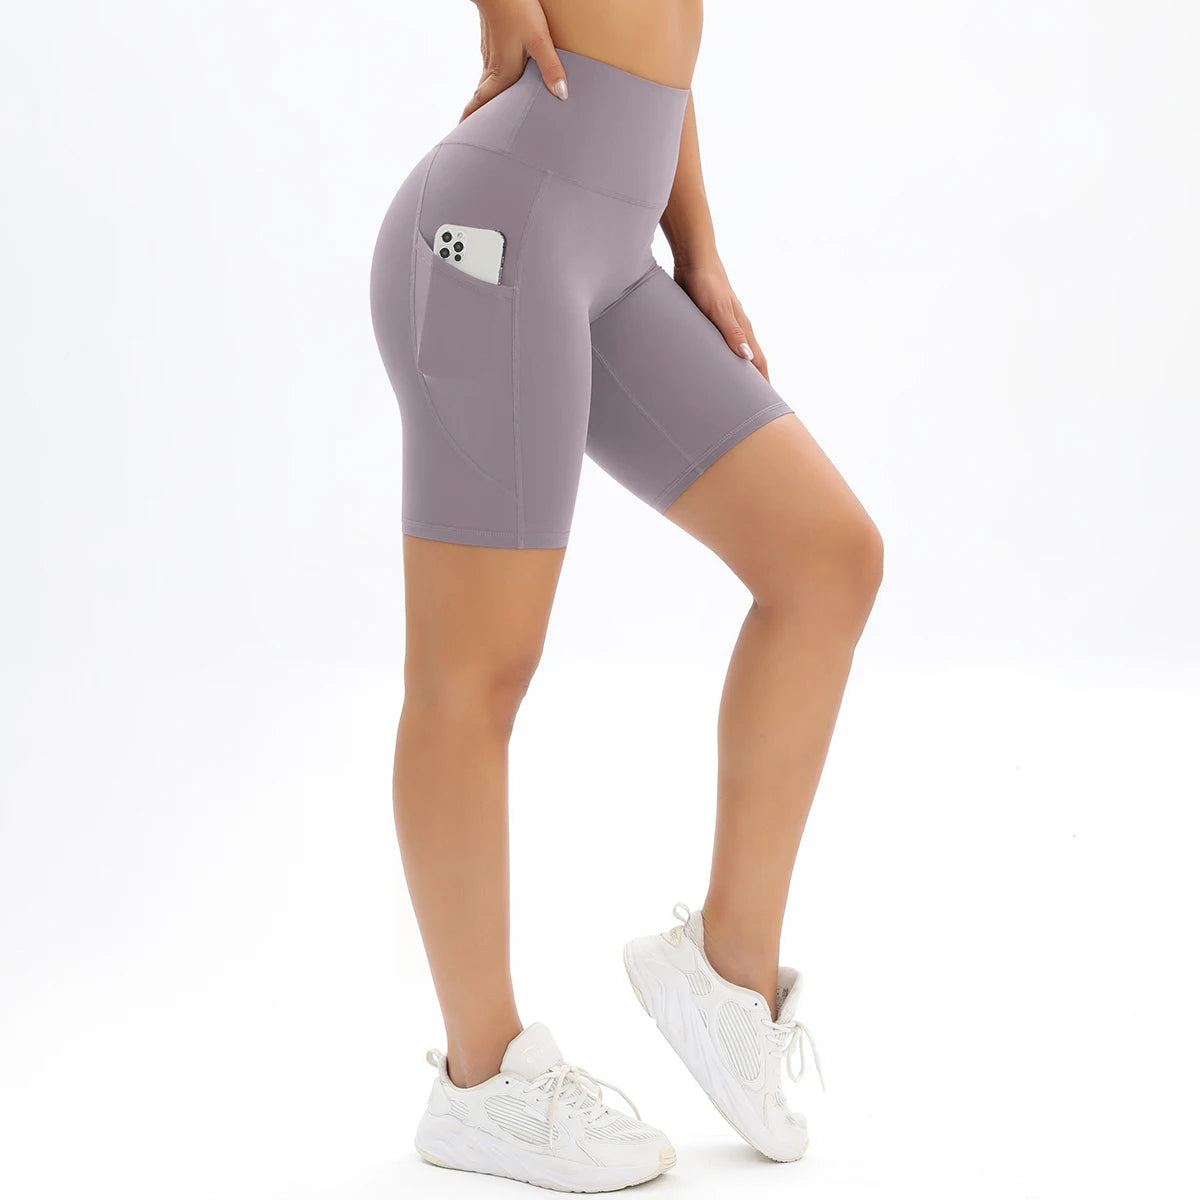 Breathable Fitness Shorts for Women: High Waist Yoga & Cycling Pants with Pocket - No Awkward Lines